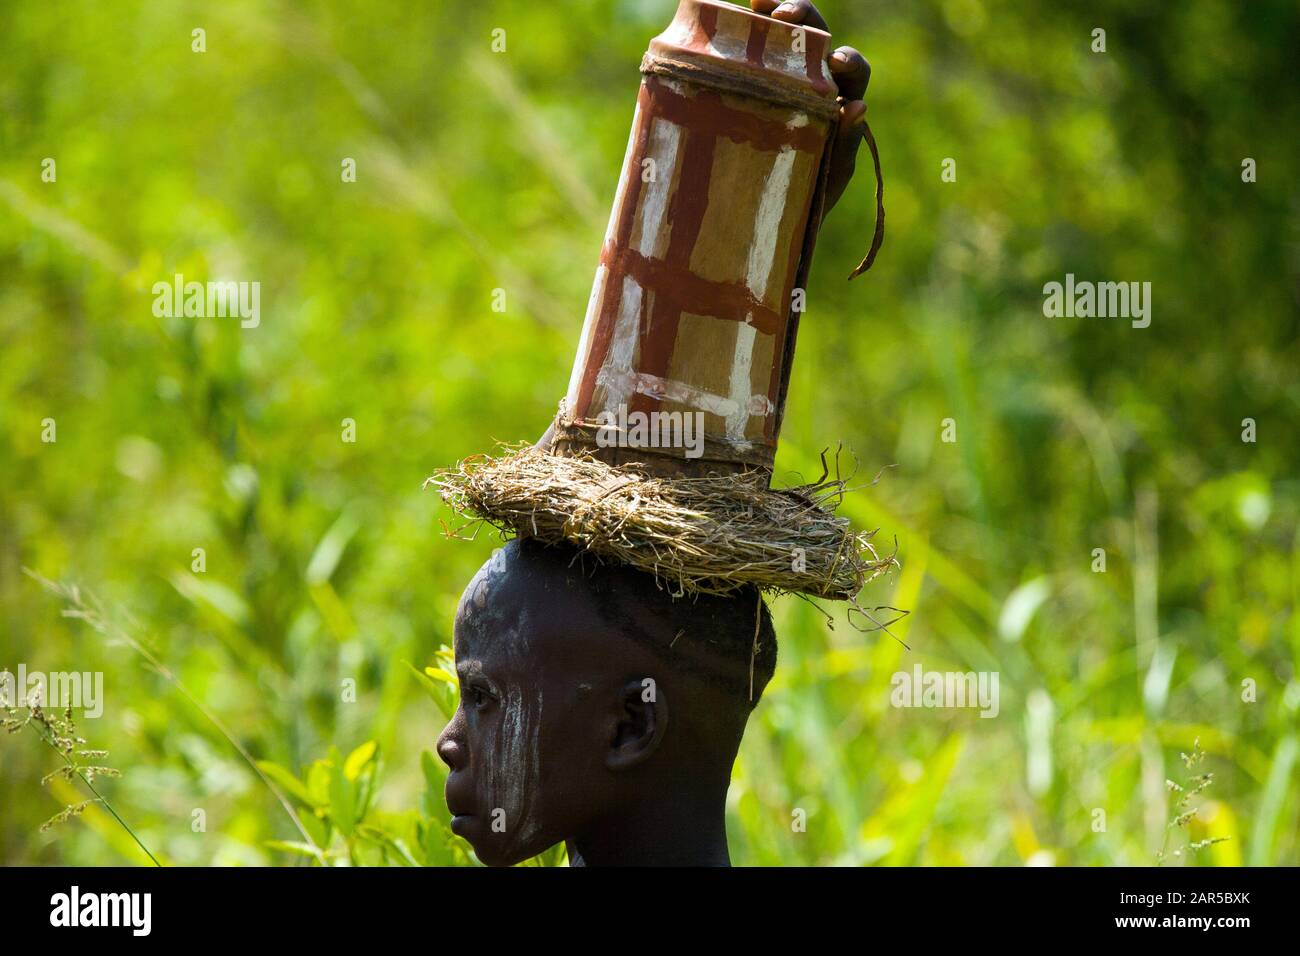 Mursi boy carrying a jar on his head. The Mursi (or Murzu) are a Sub-Saharan African nomadic cattle herder tribe located in the Omo valley in southwes Stock Photo